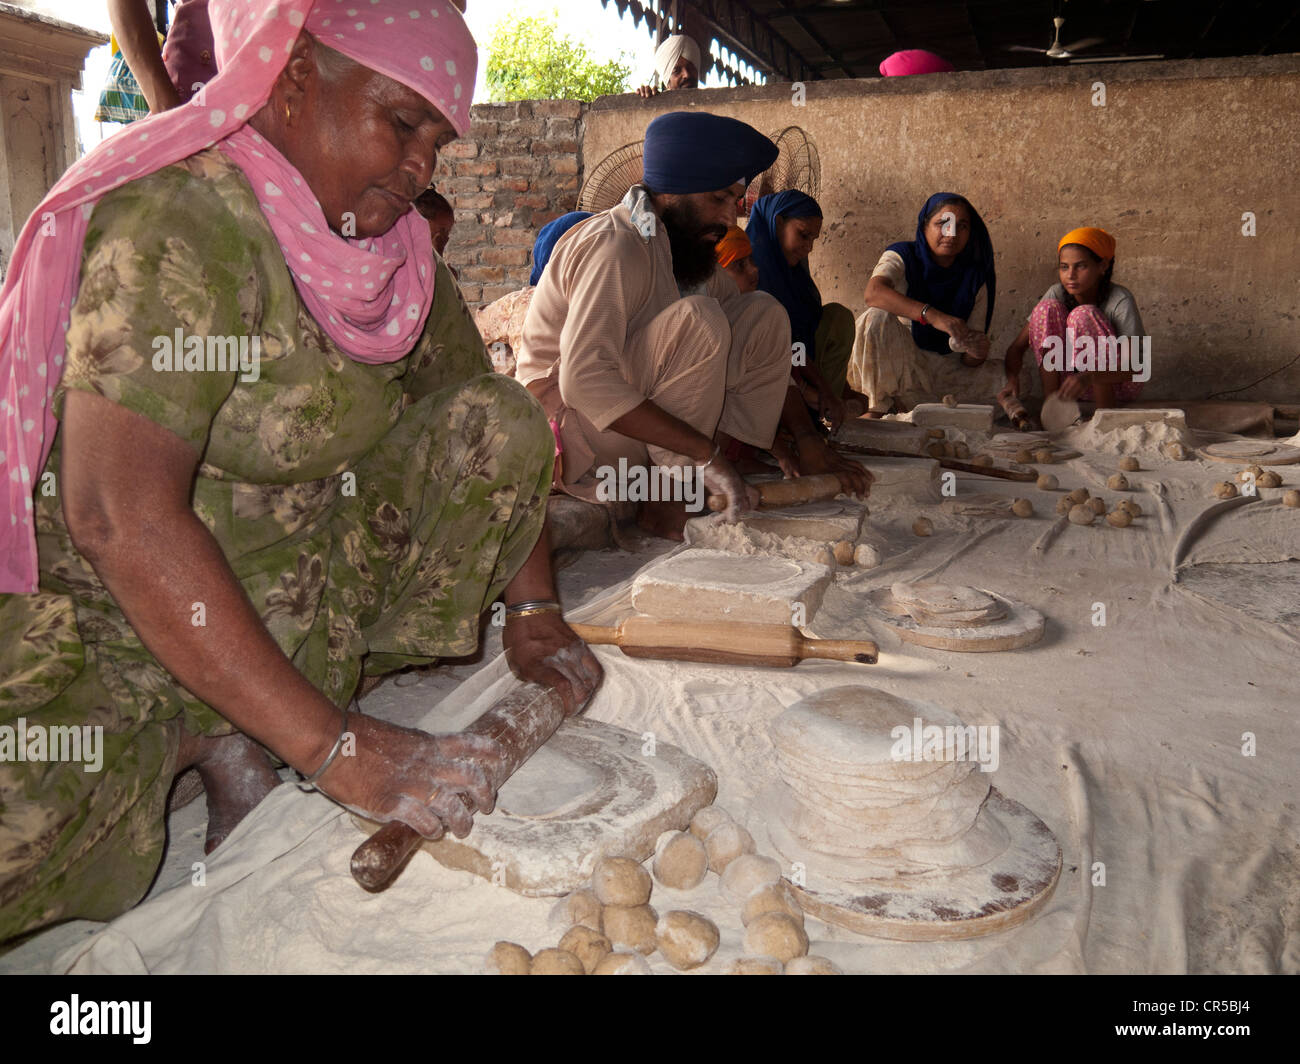 Food for all the pilgrims gets prepared by volunteers and served in the langar, or canteen, Amritsar, Punjab, India, Asia Stock Photo